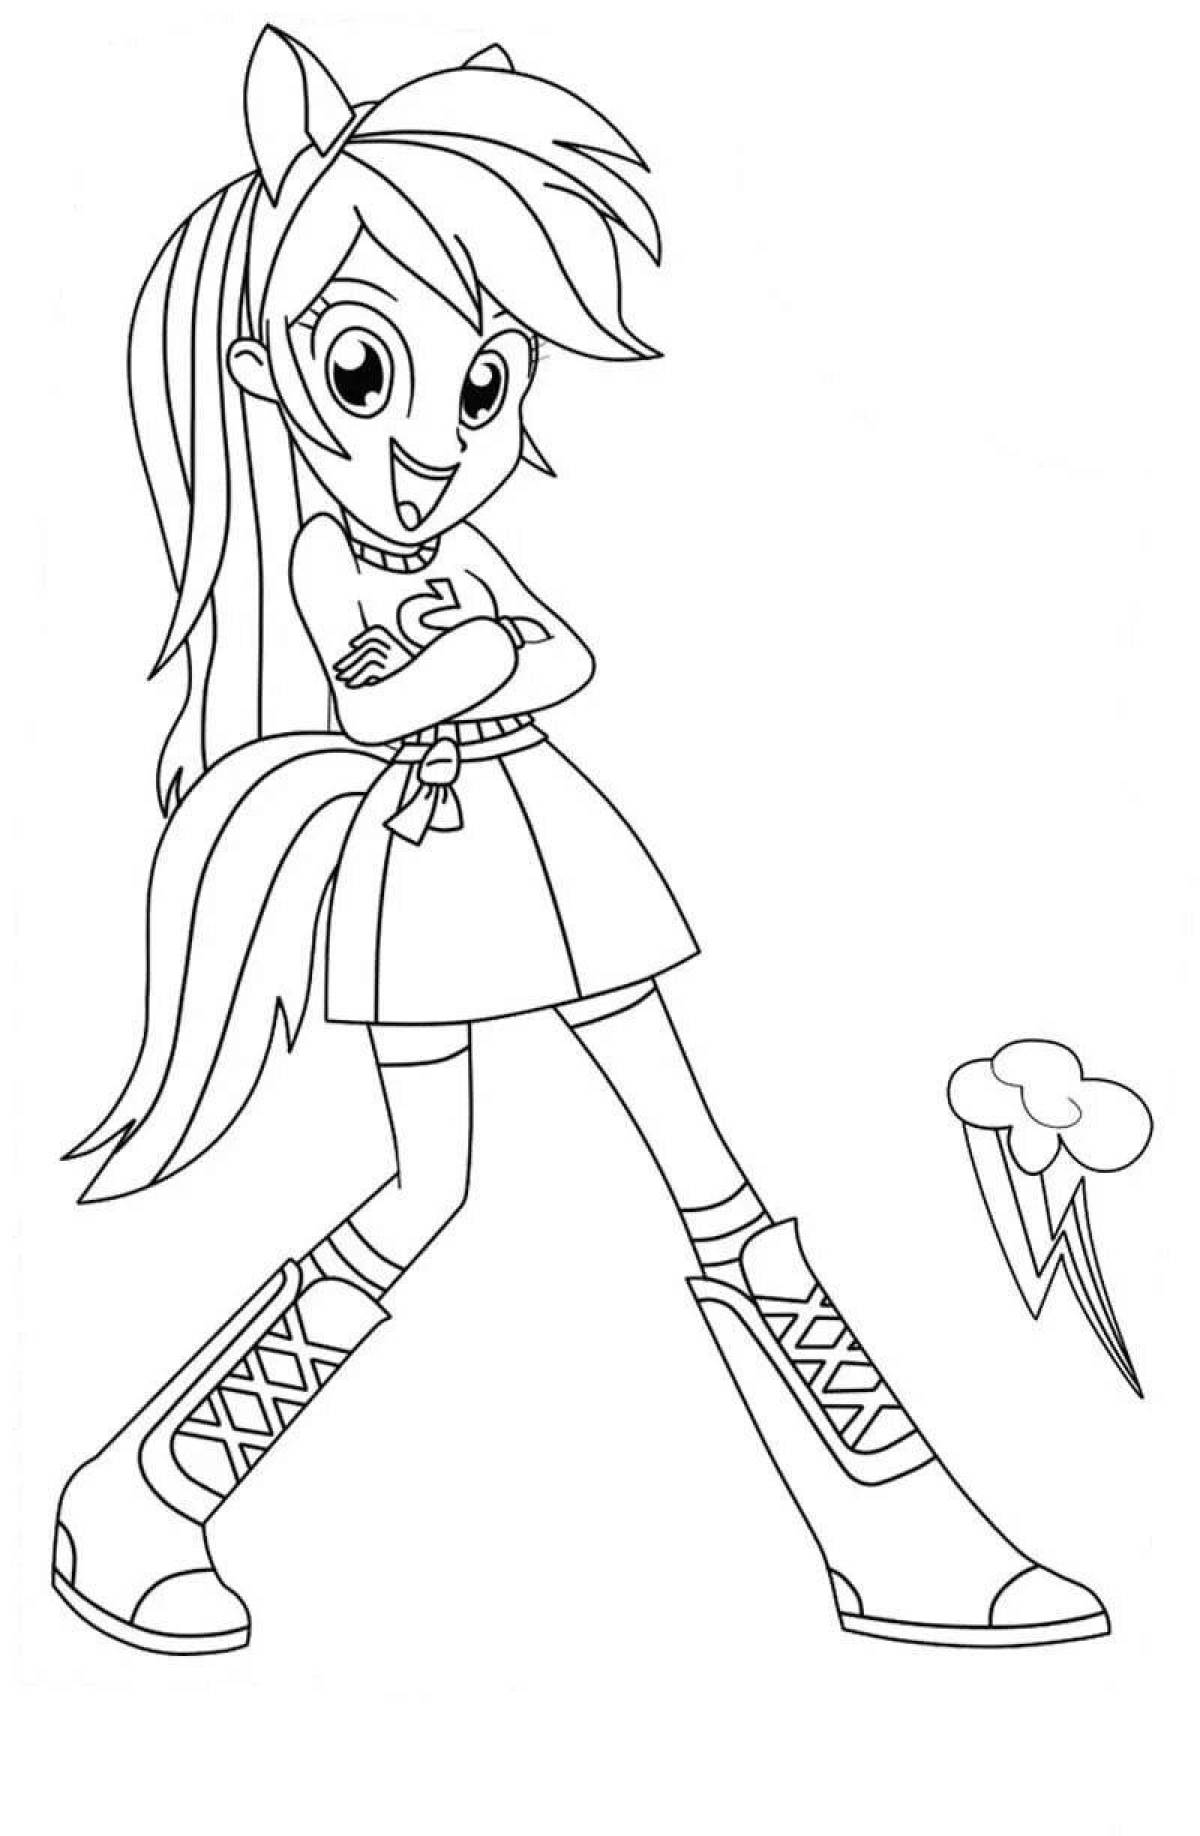 Majestic equestria pony coloring page